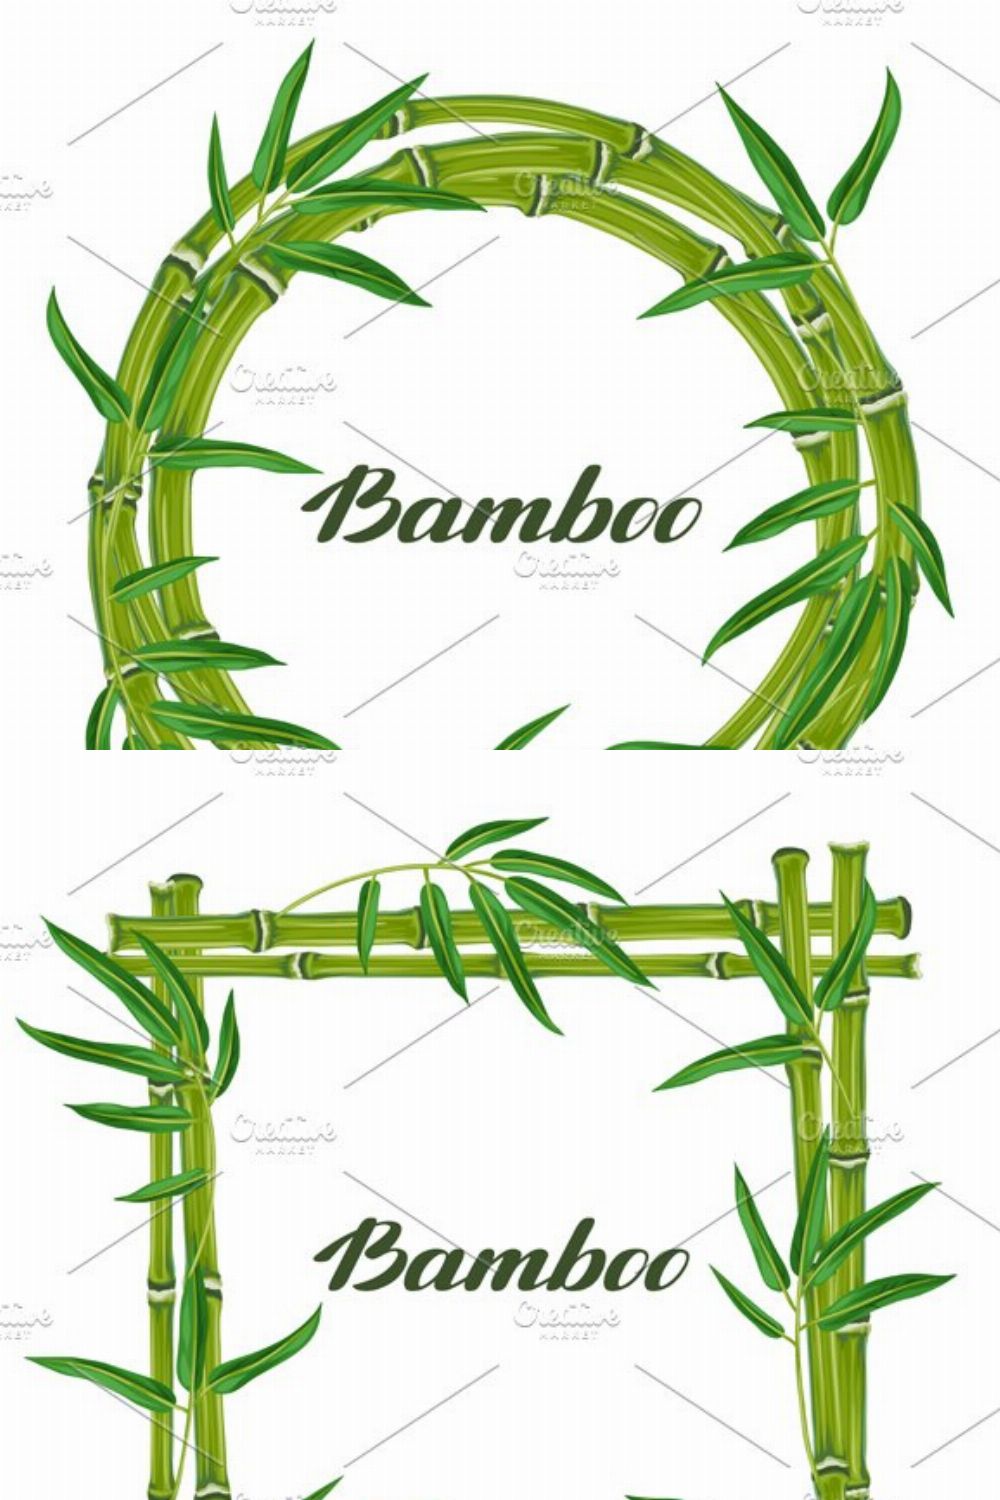 Frames with bamboo plants. pinterest preview image.